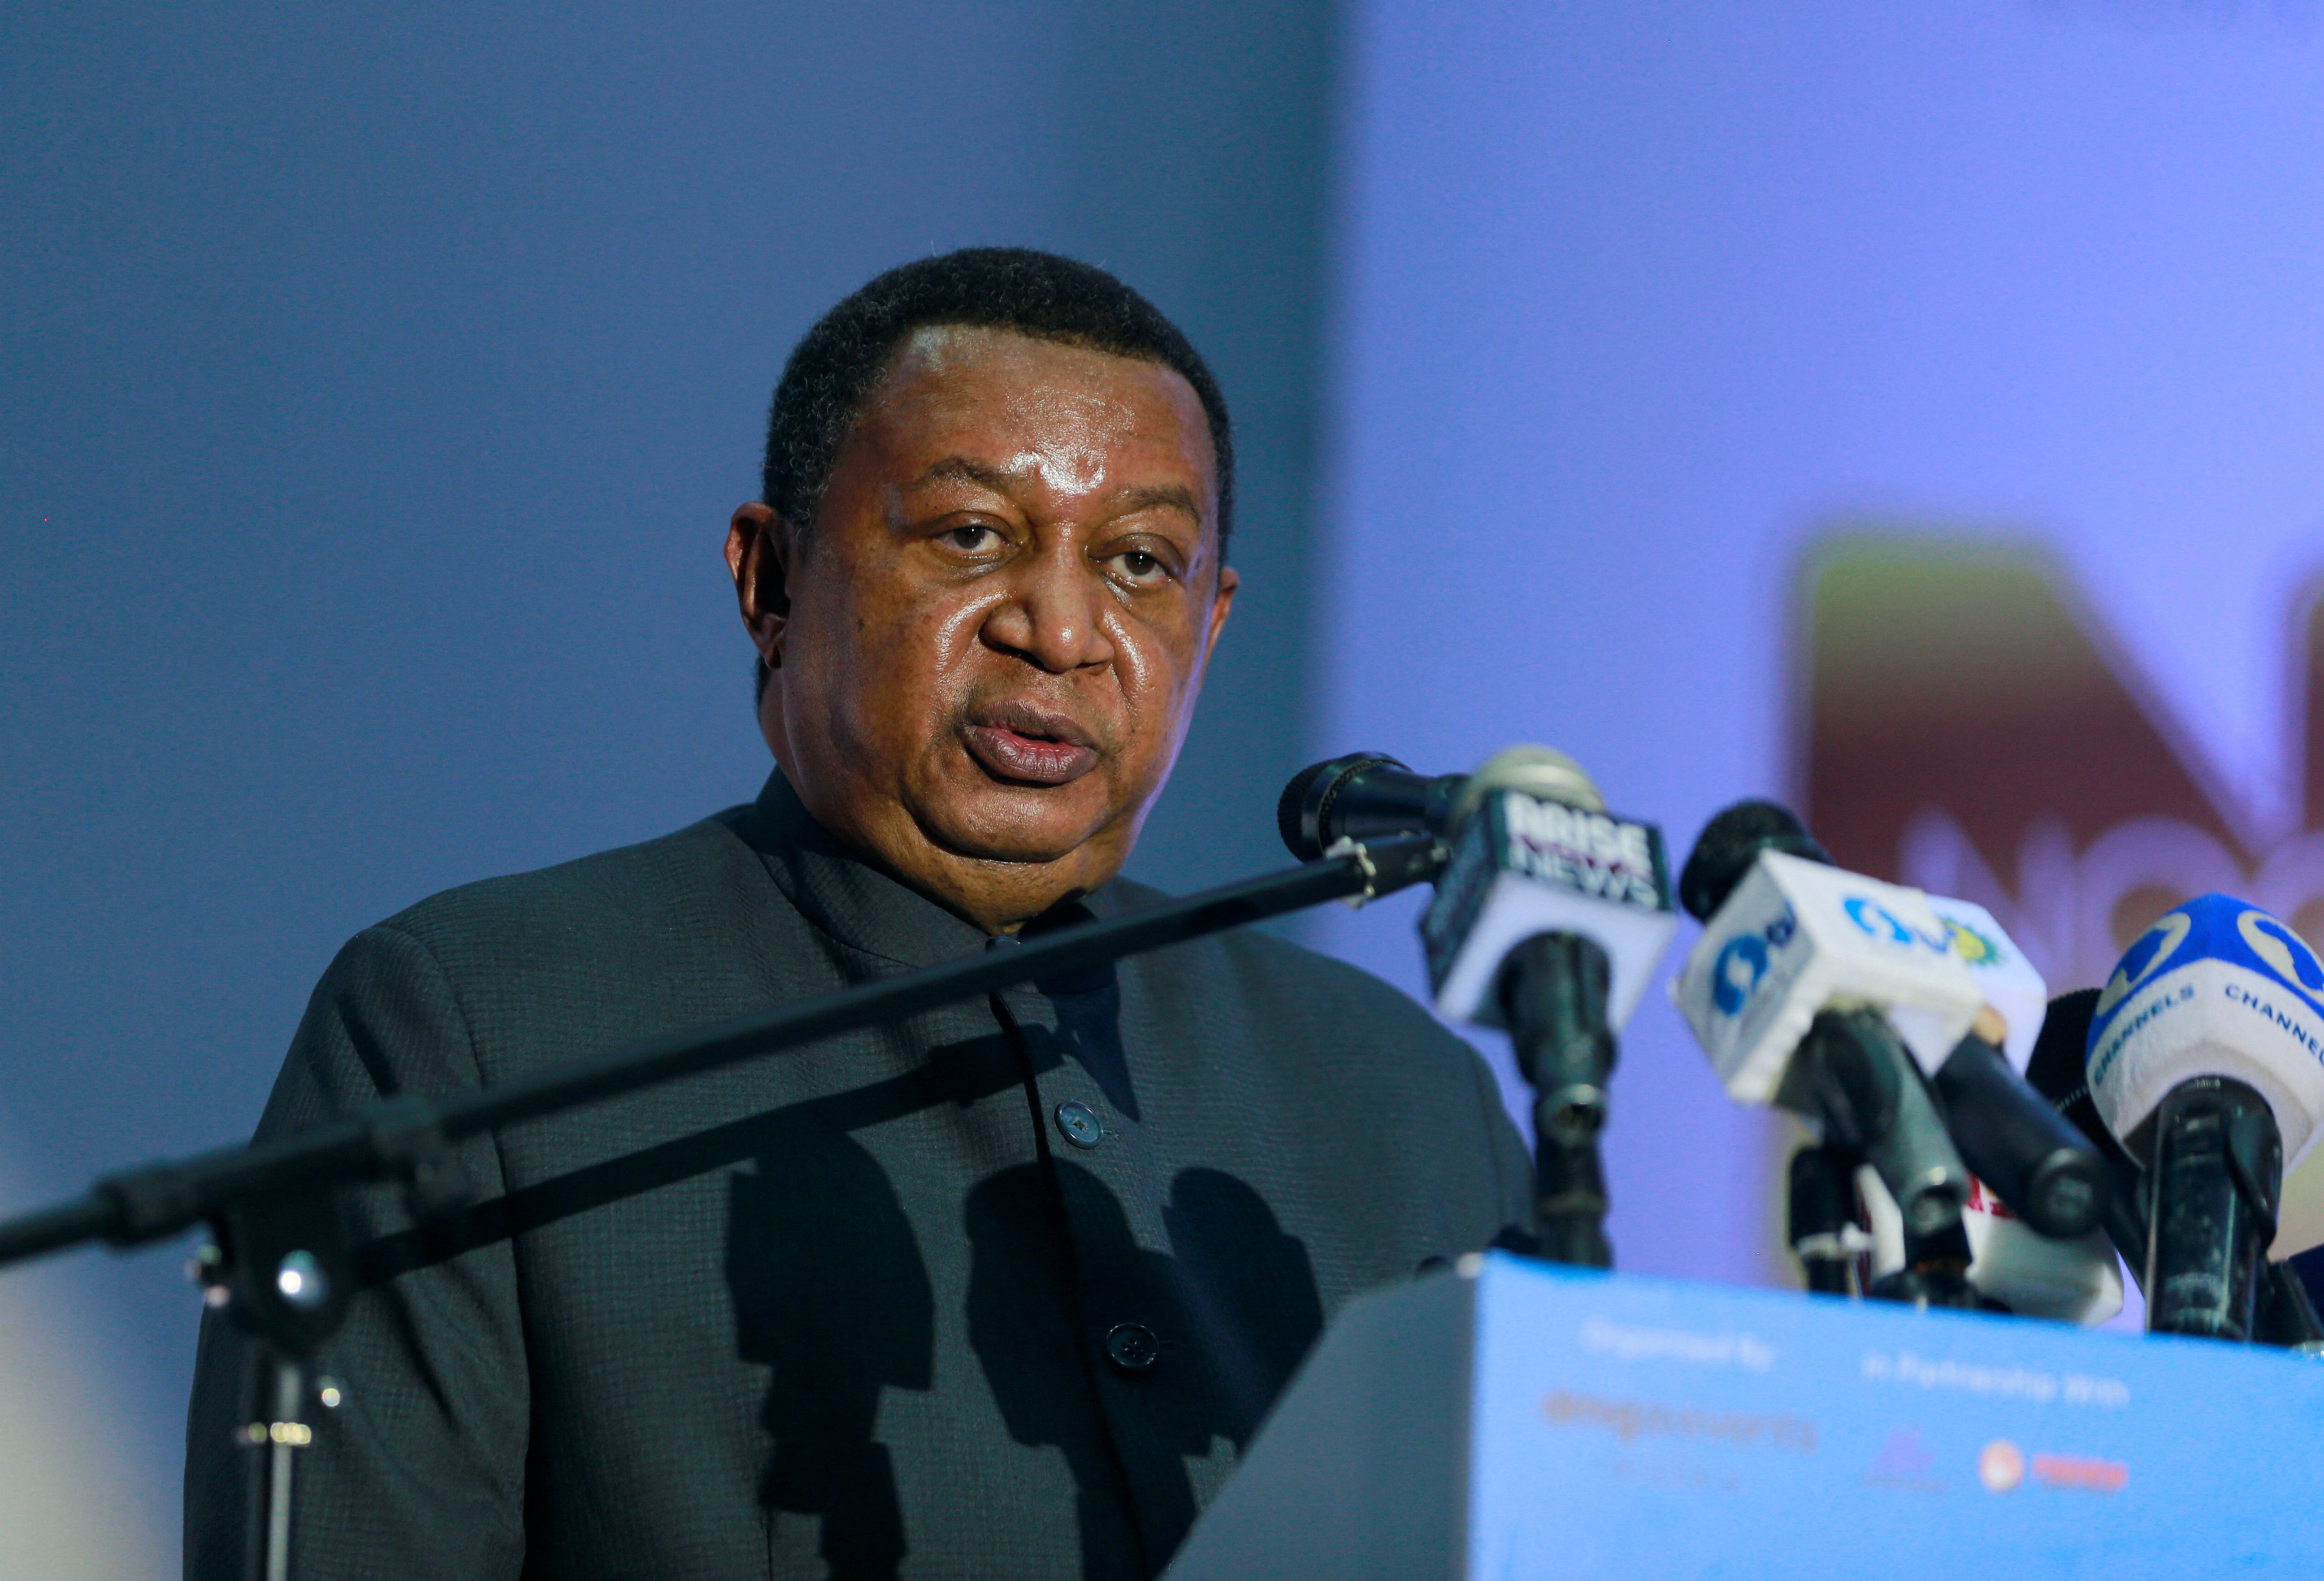 Mohammad Barkindo, secretary-general of OPEC, addresses delegates at the opening of the Nigeria Oil & Gas 2022 meeting in Abuja